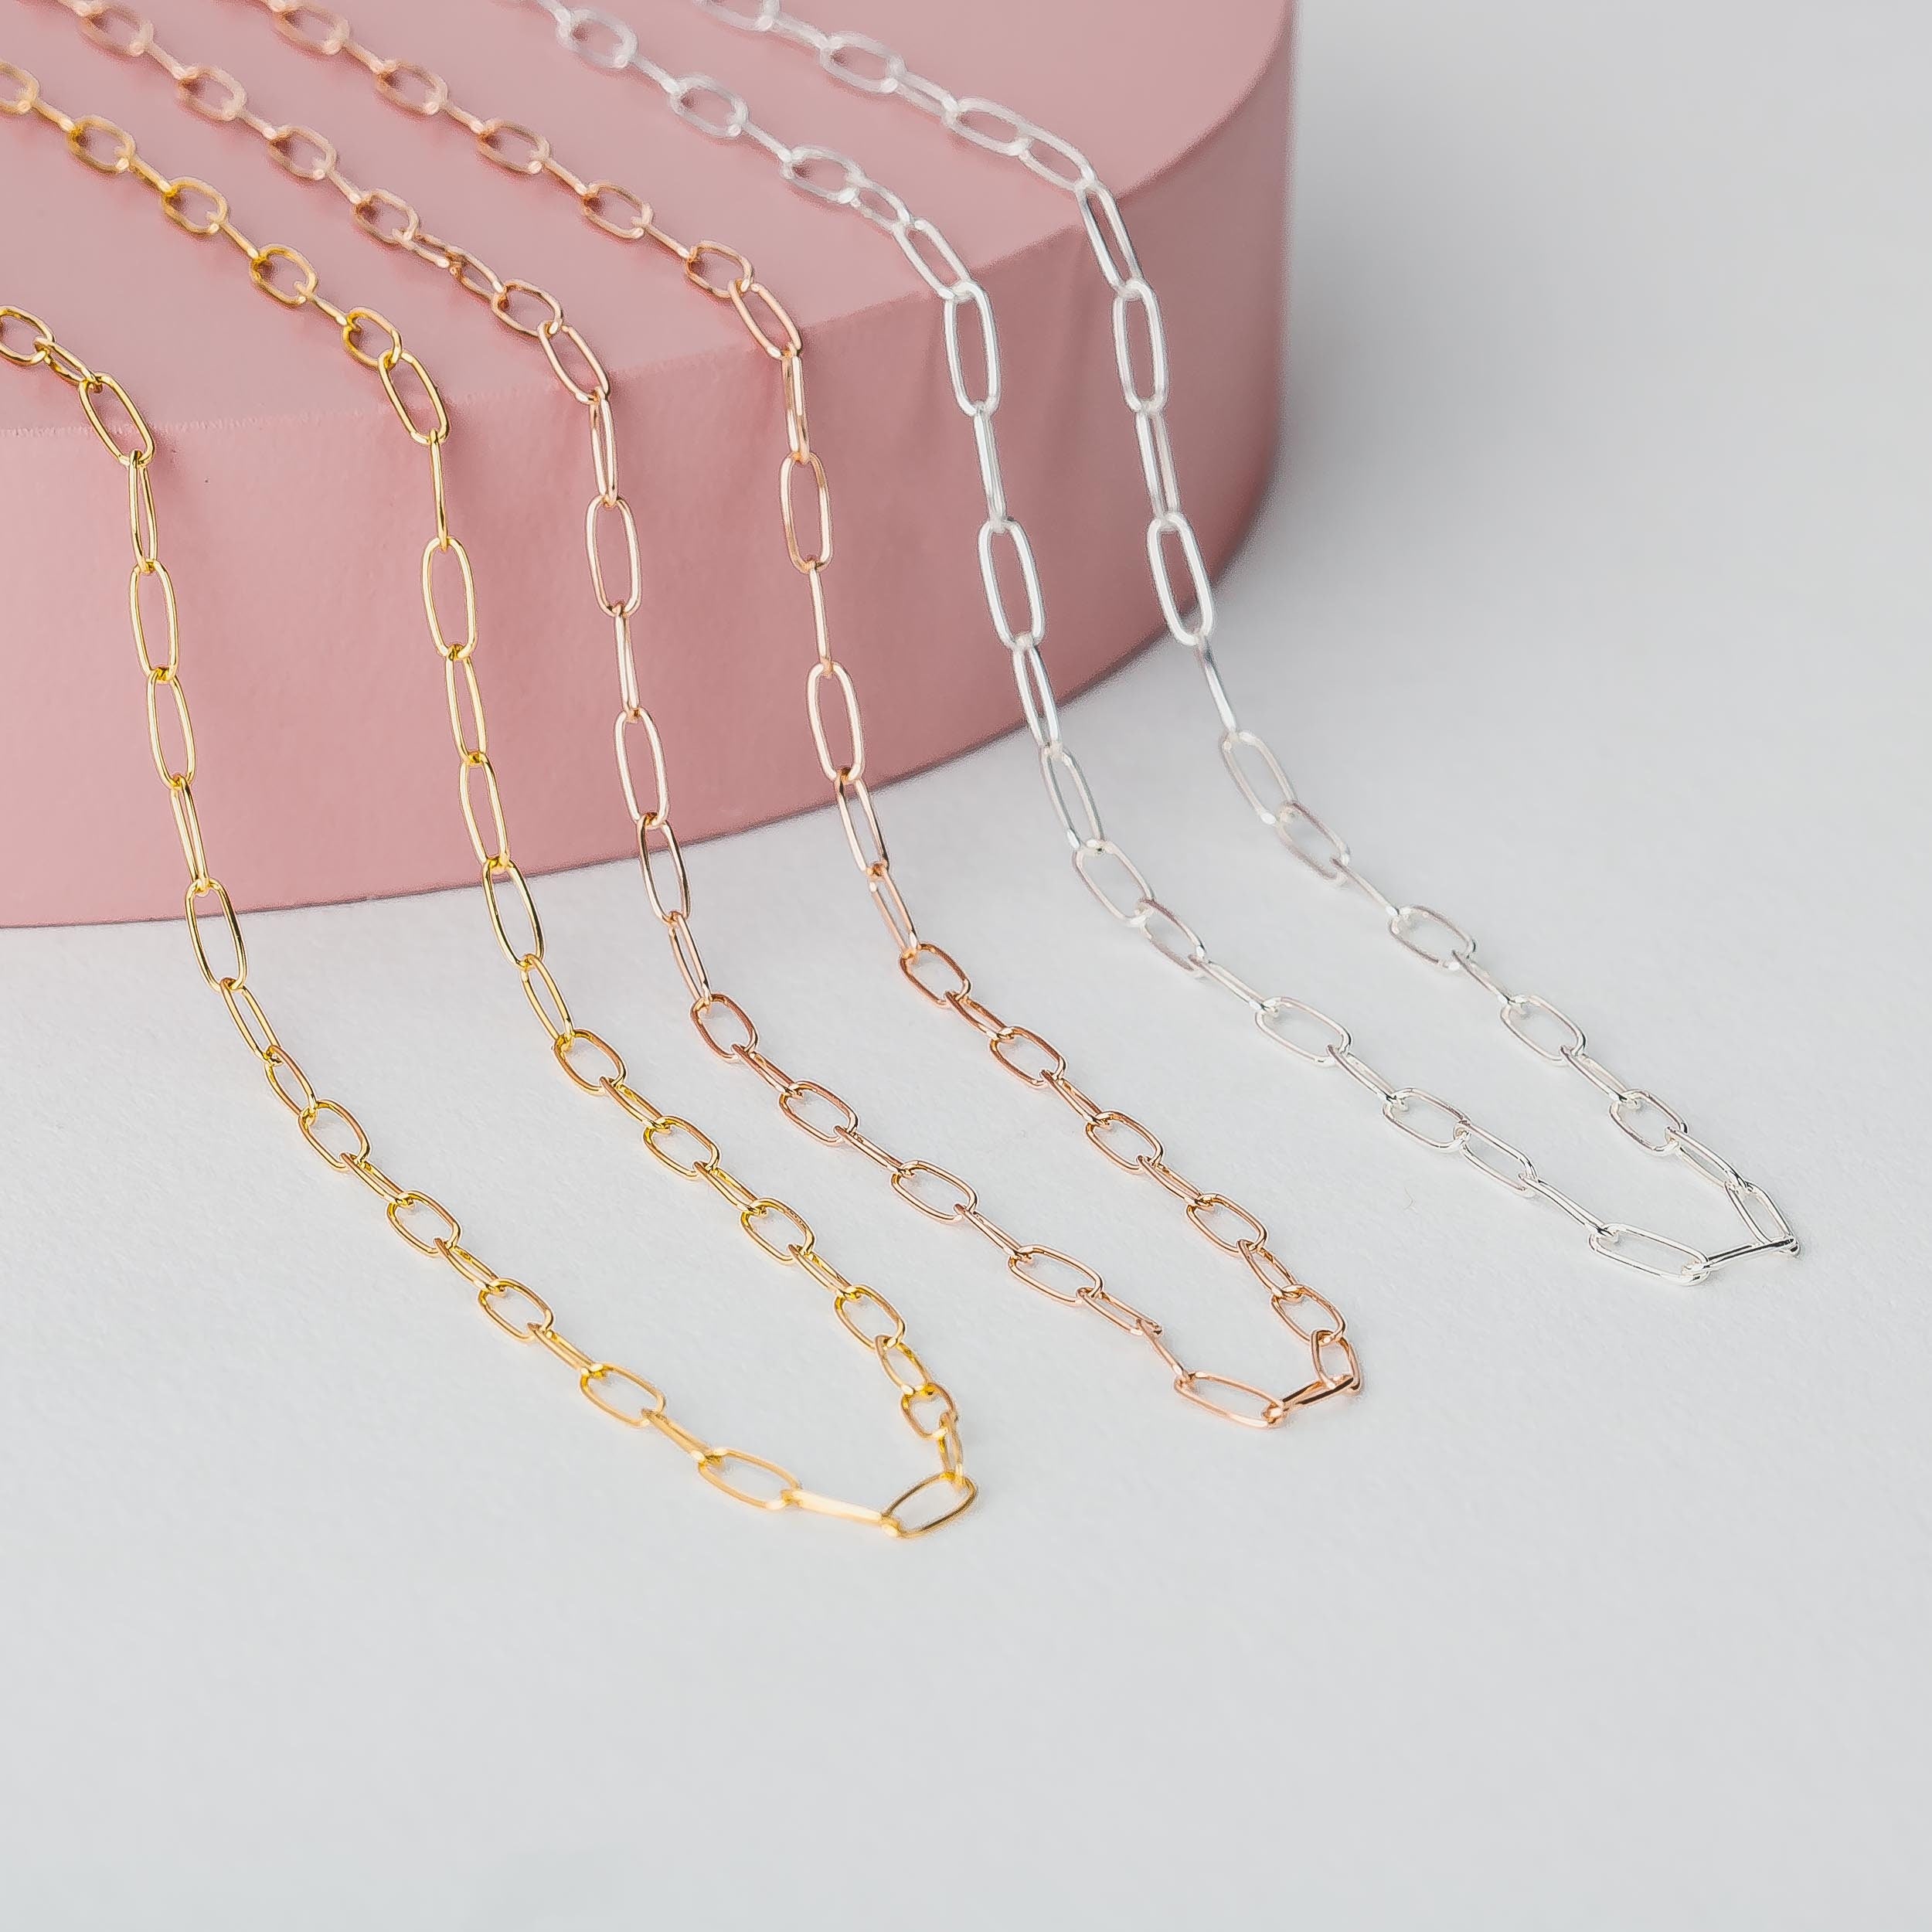 Paperclip Chain Gift Set - Melanie Golden Jewelry - _badge_new, bracelets, bridal party, essential chains, everyday essentials, gift sets, love, necklaces, new